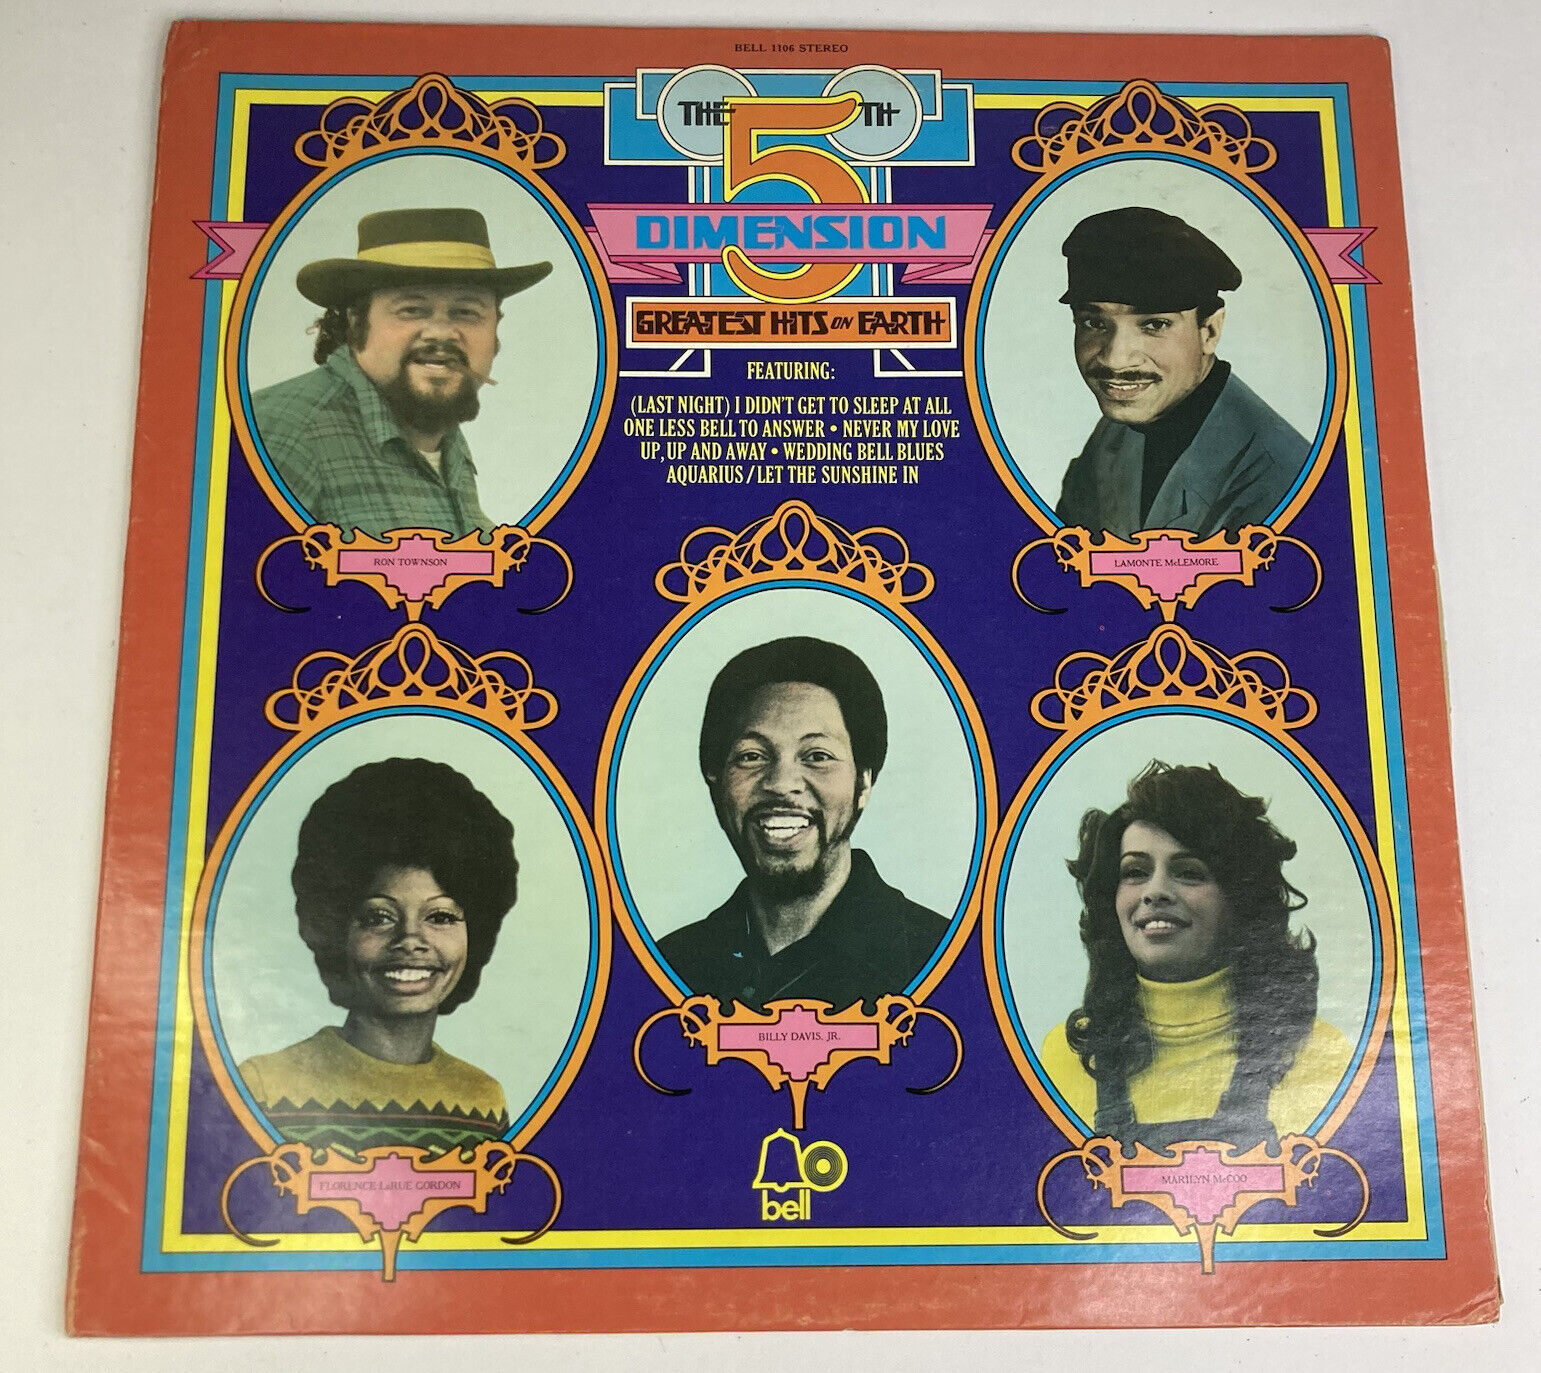 Vintage 1972 The 5th Dimension “Greatest Hits on Earth” 12” LP Vinyl Bell Record